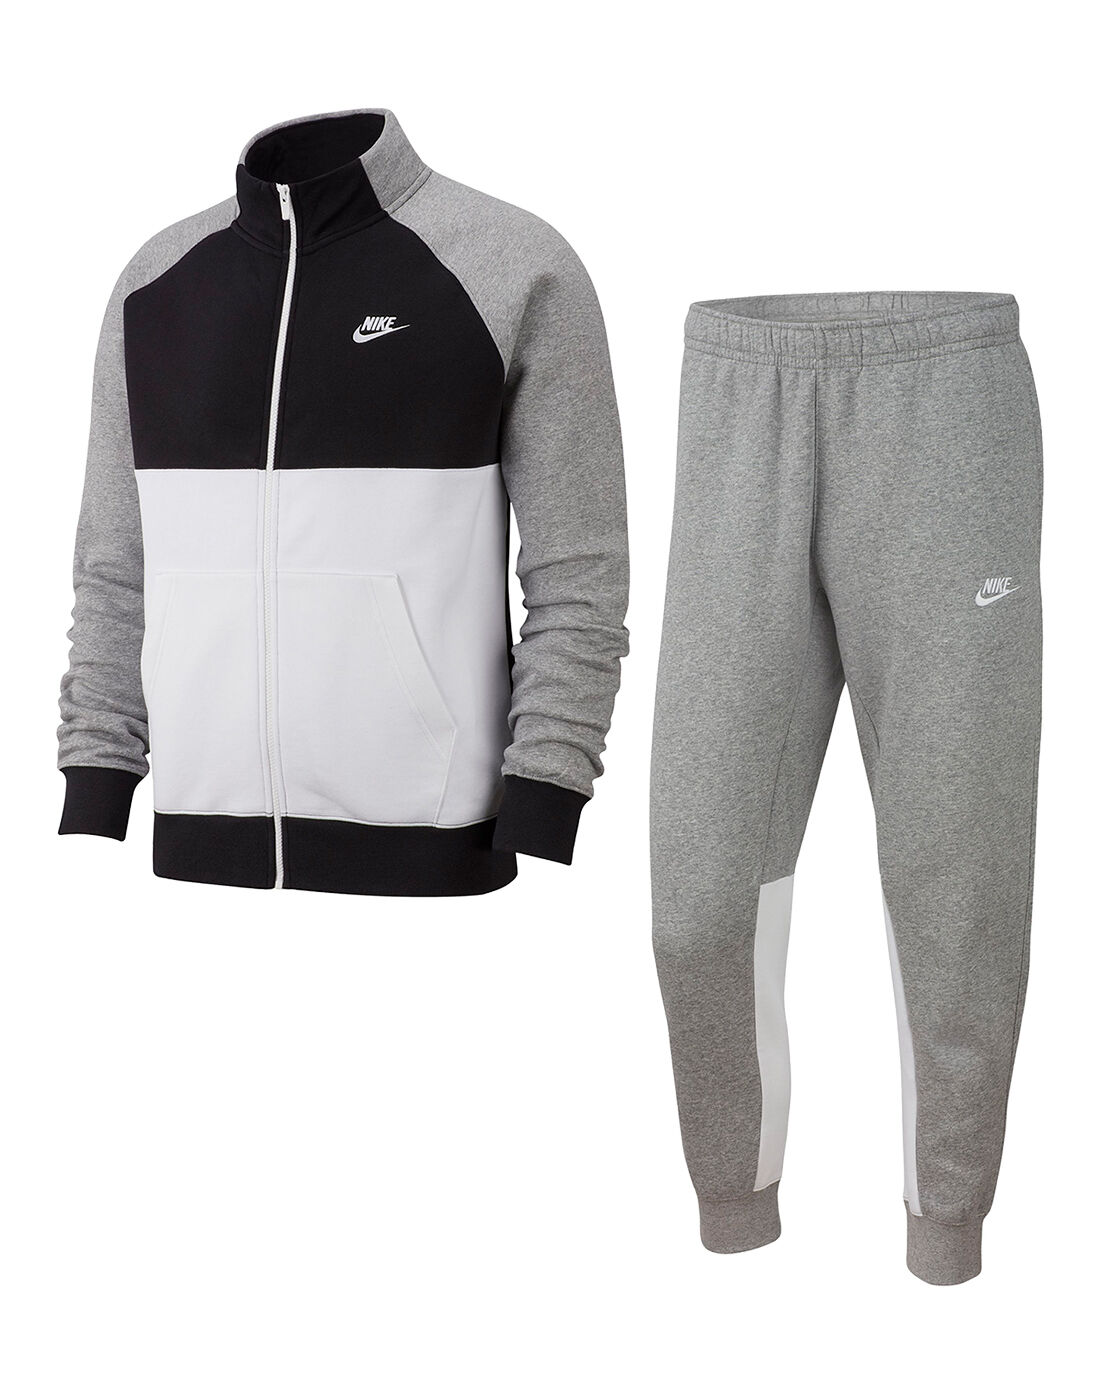 grey and black nike tracksuit